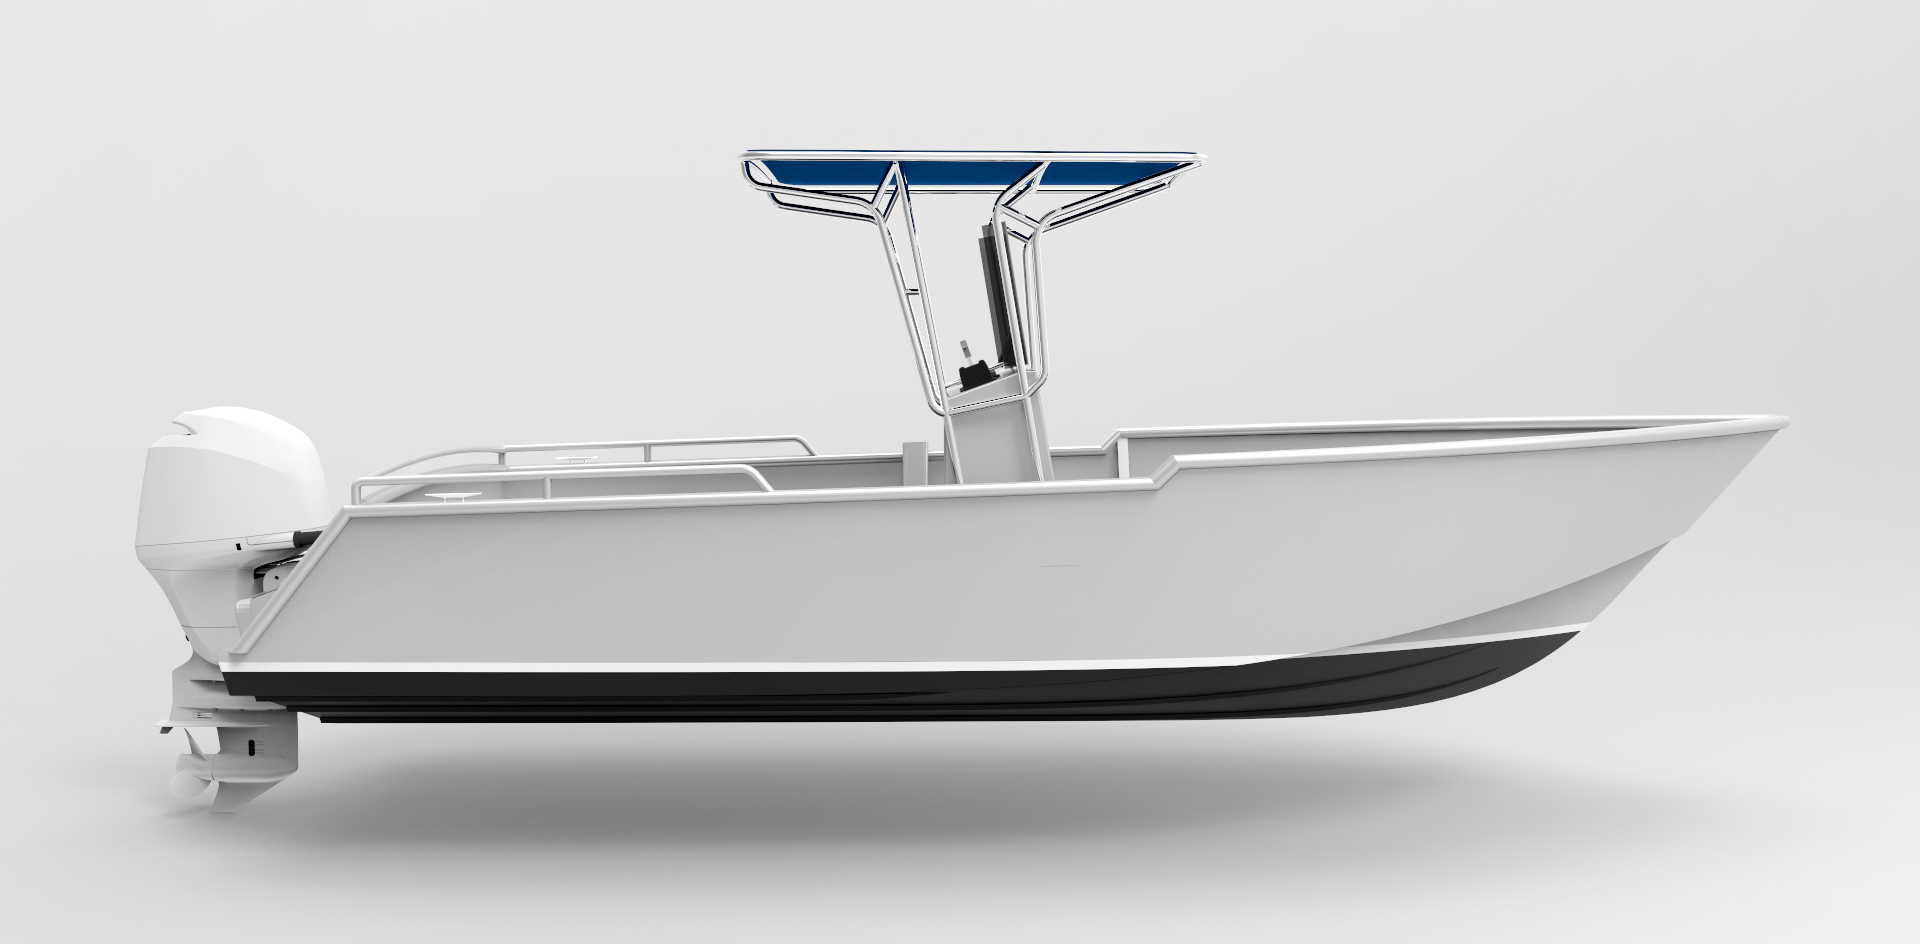 An easy to build 20 foot welded aluminum alloy boat kit. 